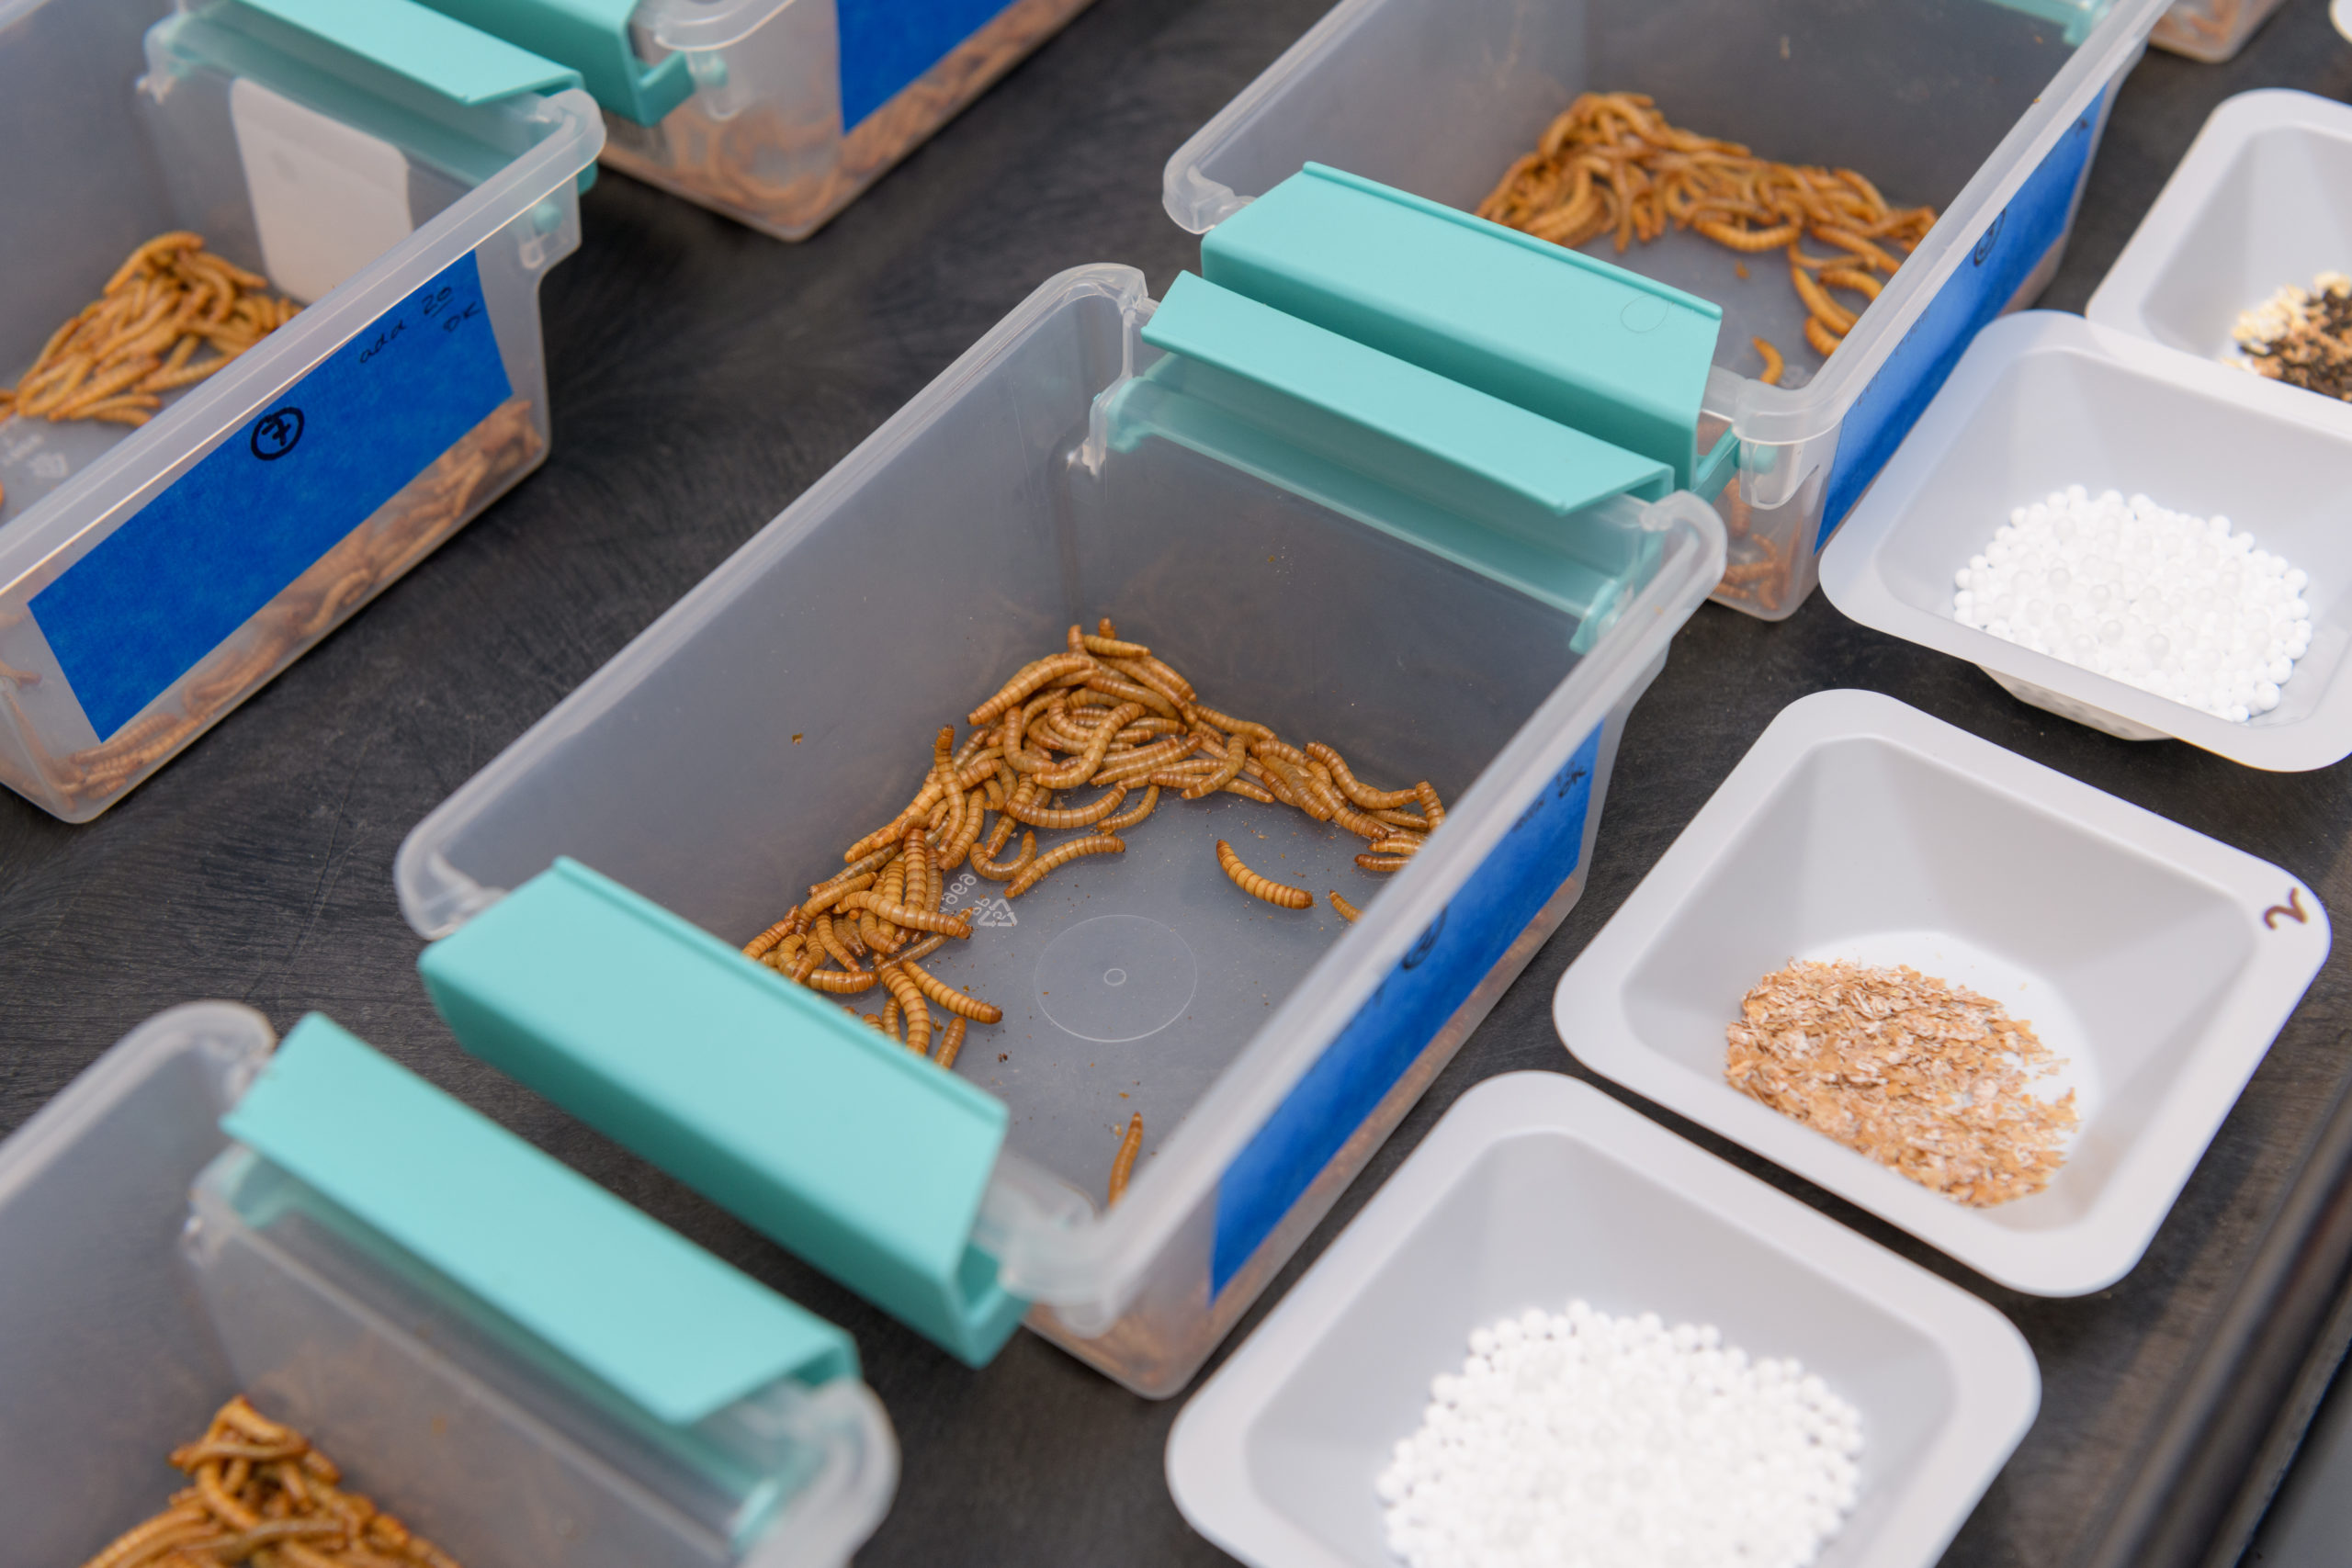 Yellow mealworms, the larvae of the yellow mealworm beetle, sit in clear plastic bins across from containers of small white plastic beads.